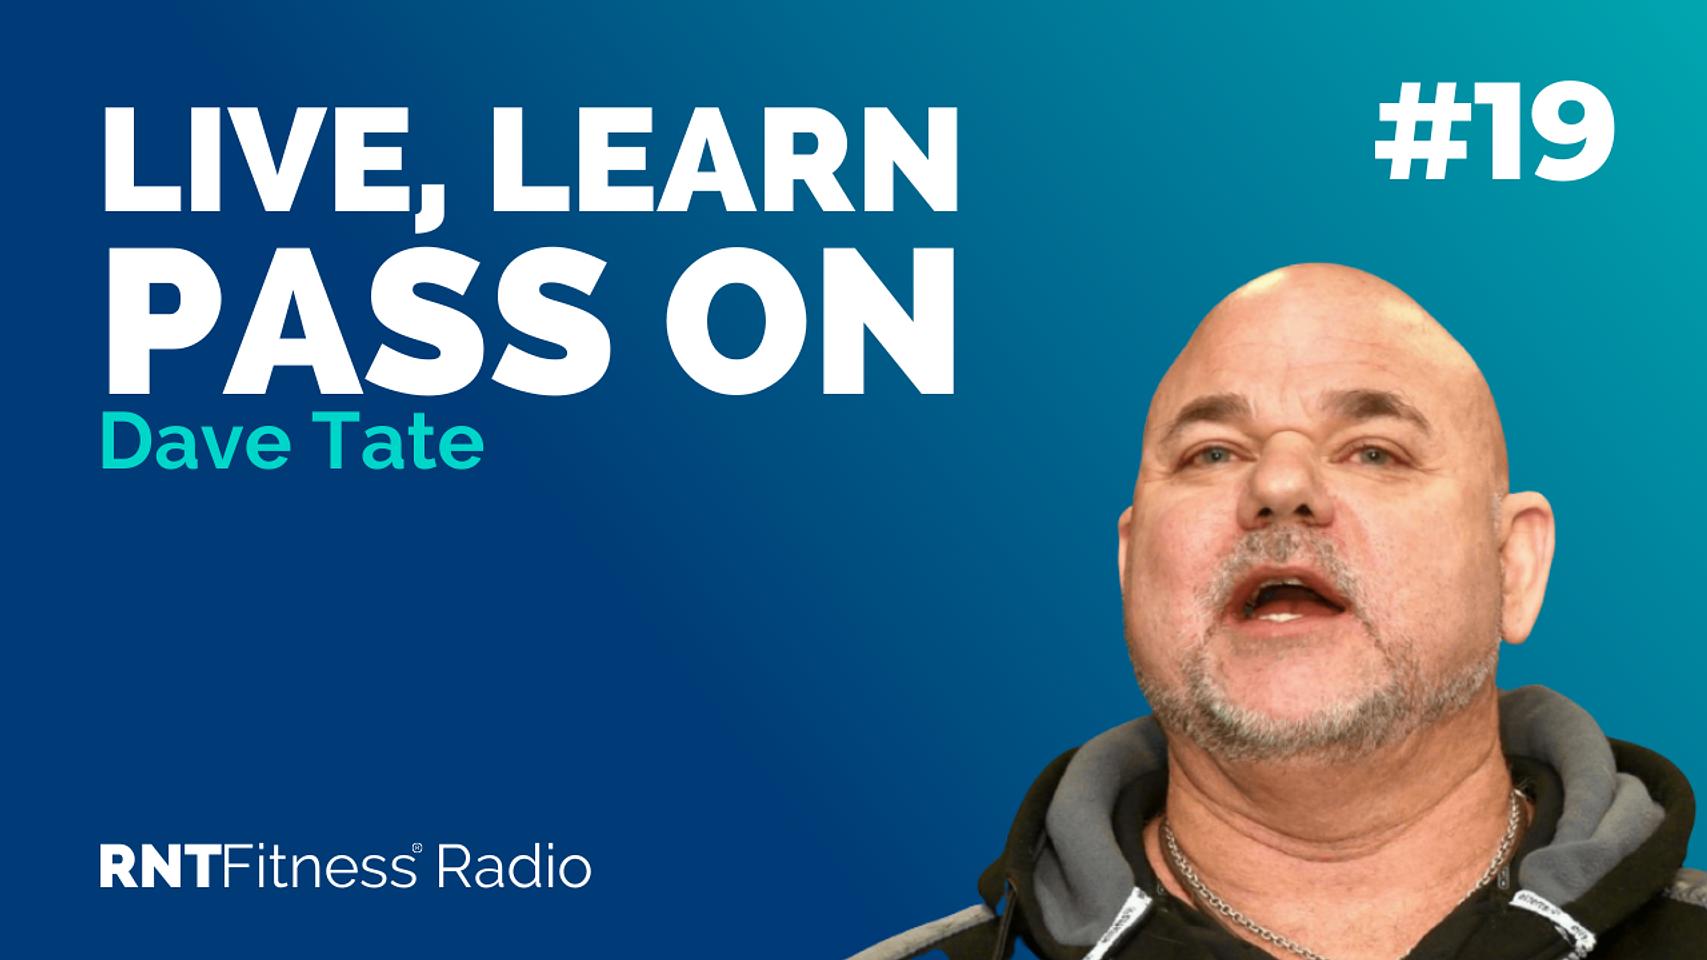 Ep. 19 - Live, Learn, Pass On w/ Dave Tate